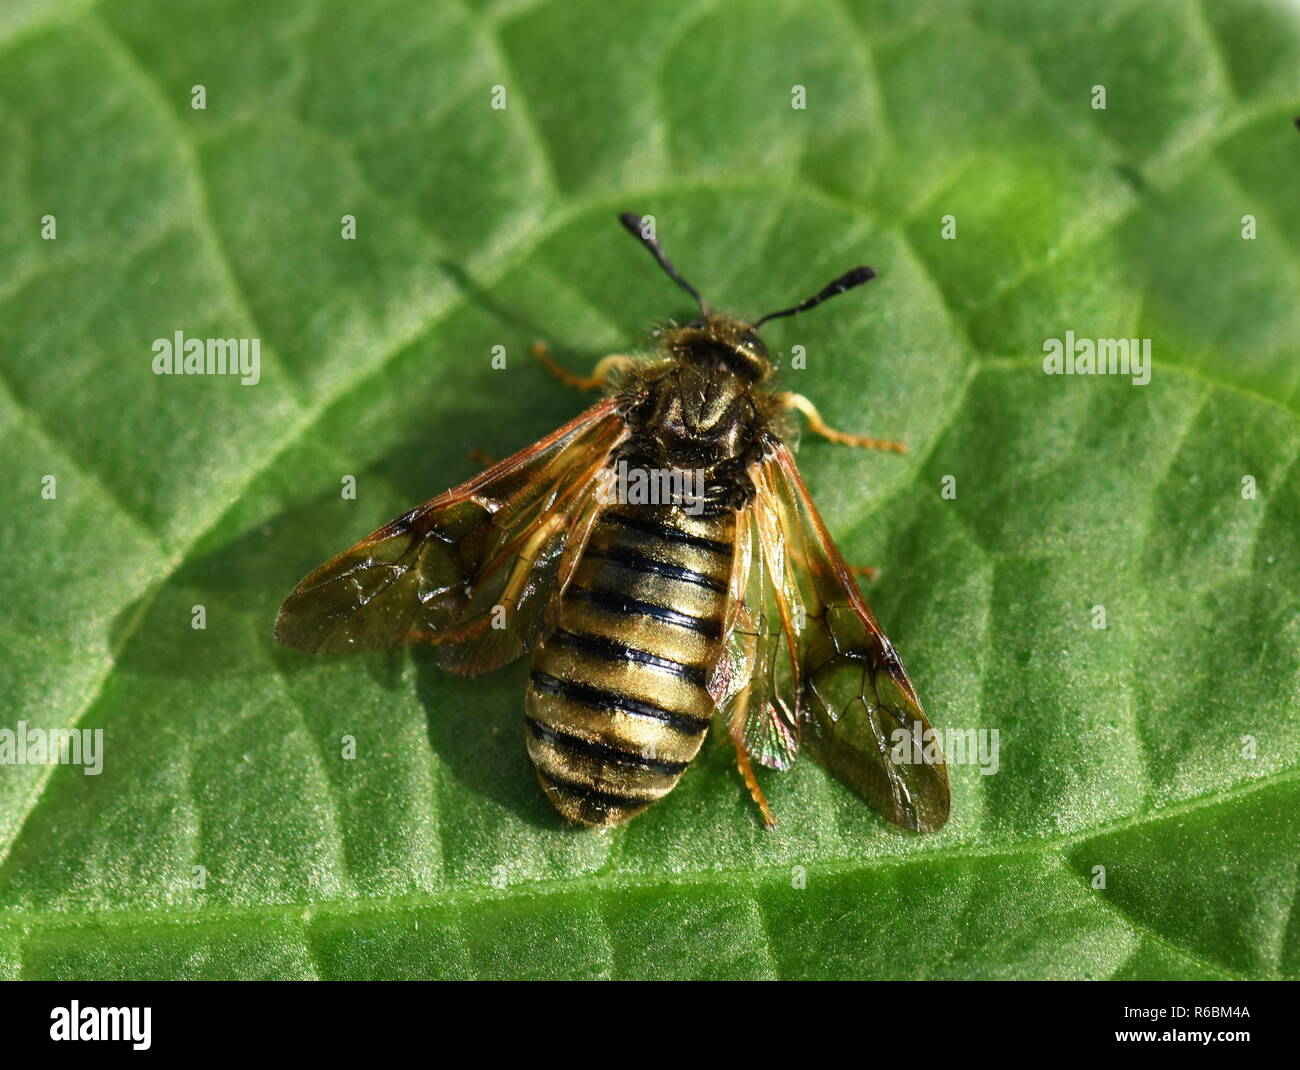 The gold and black striped sawfly Abia lonicerae sitting on a leaf Stock Photo